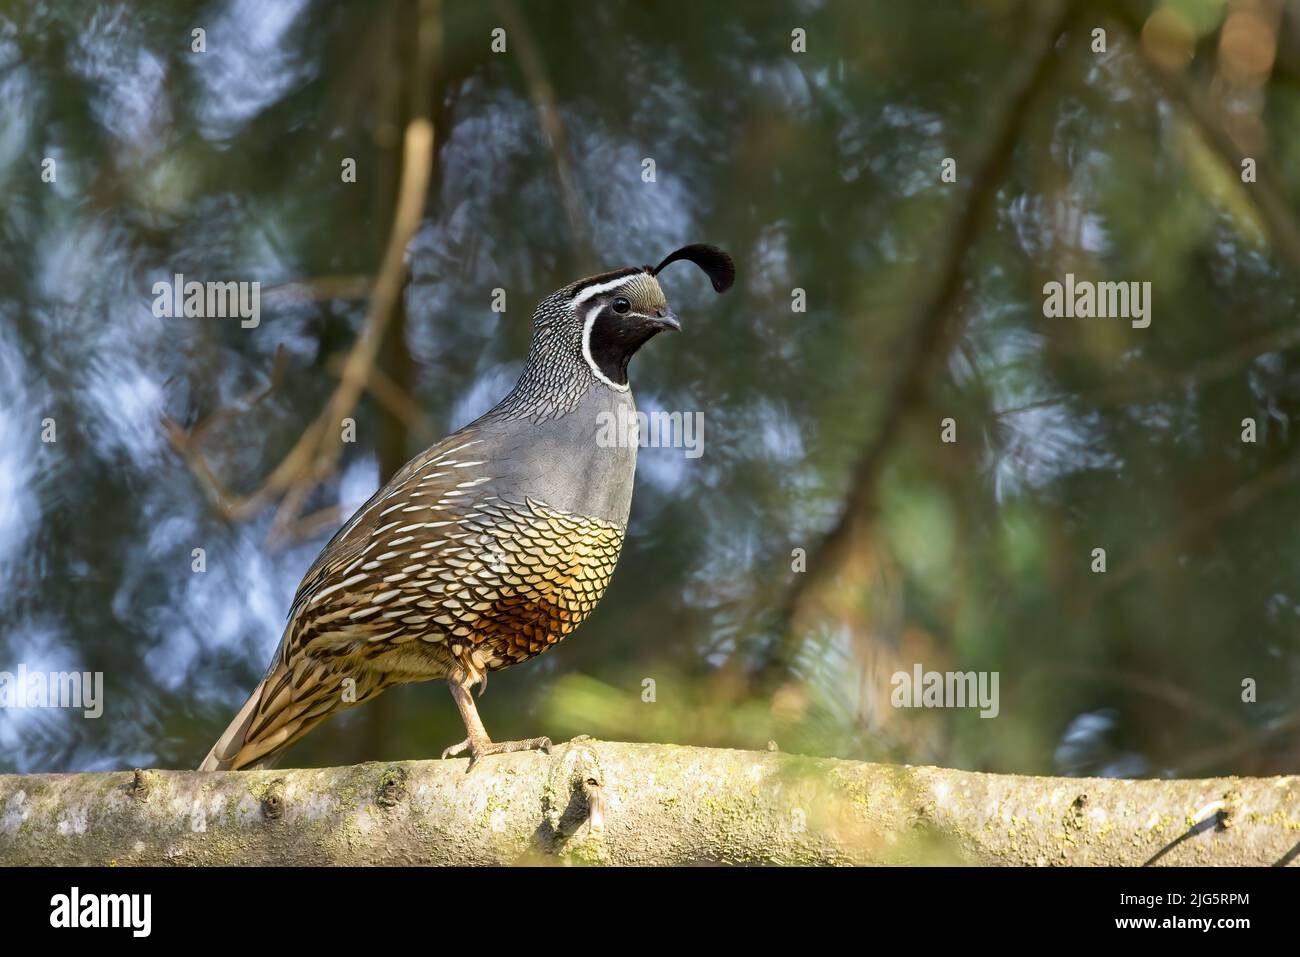 A male quail stands on a branch in Rathdrum, Idaho. Stock Photo